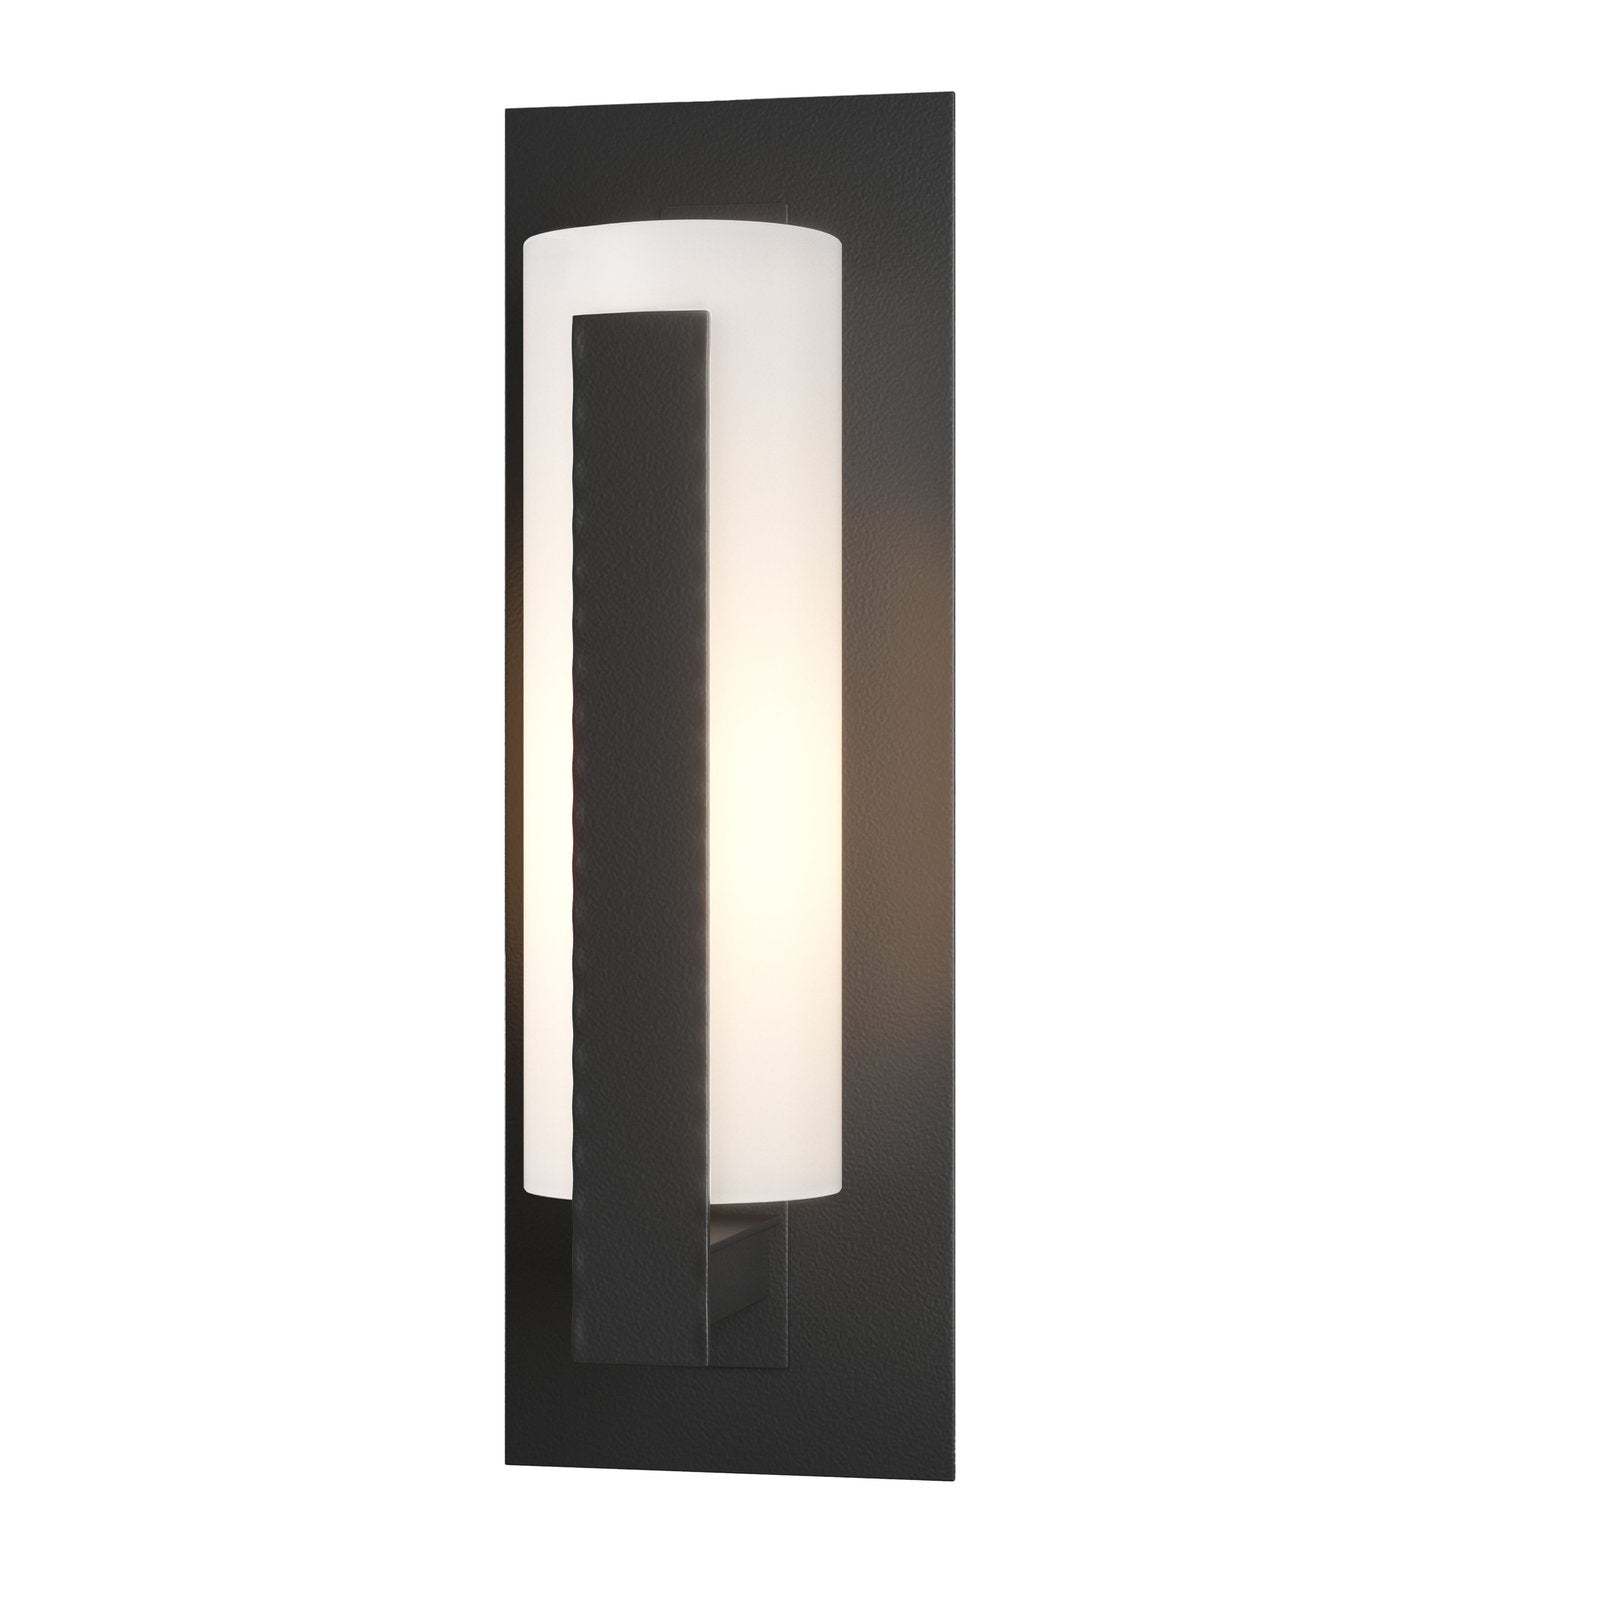 Hubbardton Forge Forged Vertical Bars Small Outdoor Sconce Outdoor l Wall Hubbardton Forge Coastal Black Opal Glass (GG) 